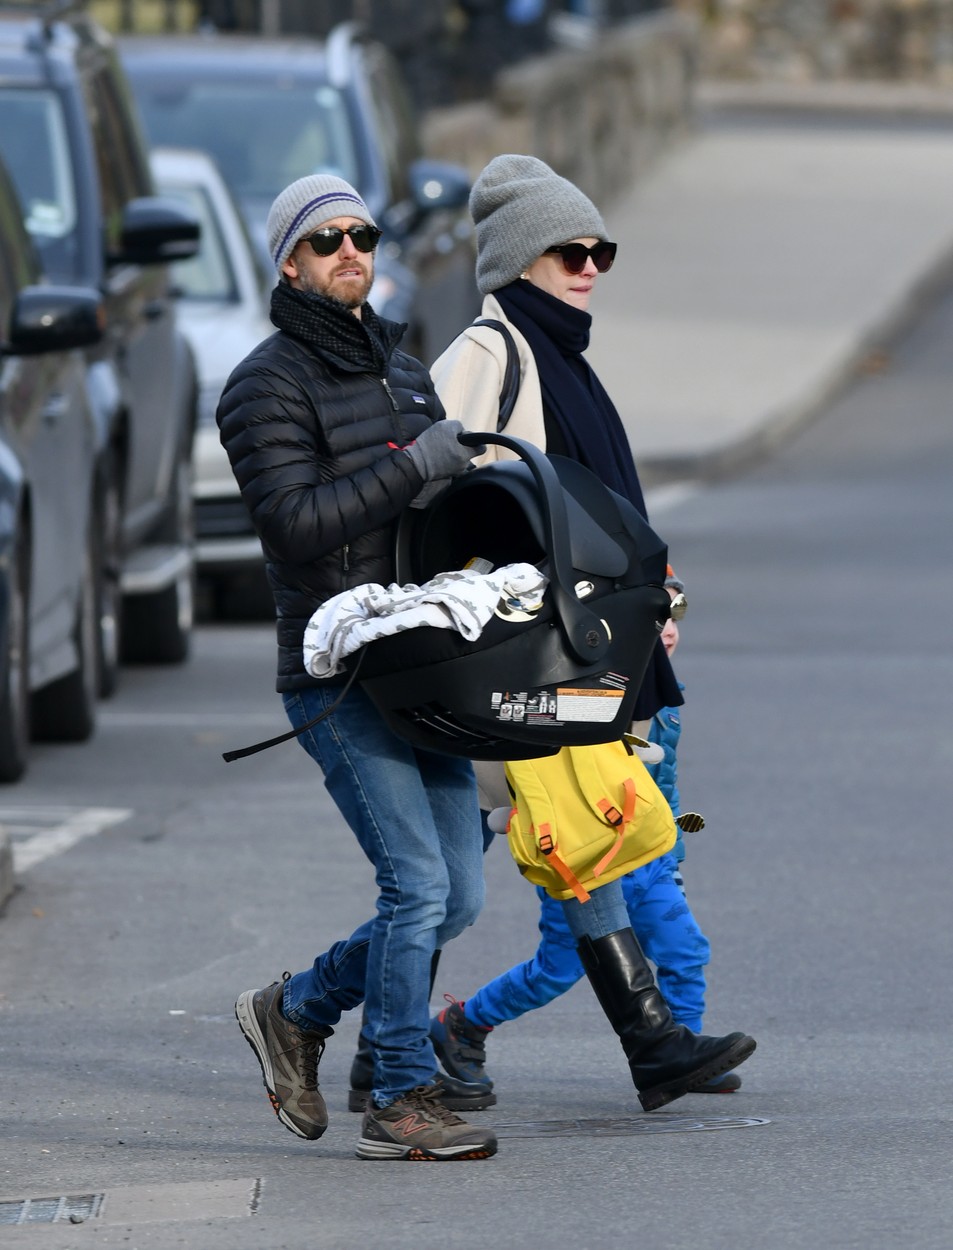 12/08/2019 EXCLUSIVE: FIRST PICTURES!  Anne Hathaway and Adam Shulman are spotted in Connecticut. Shulman carried a bassinet as the couple headed out for a family outing in a picturesque seaside town. Hathaway, 37, looked trim while wearing a grey beanie, black scarf, wool coat, jeans, and black boots., Image: 487188831, License: Rights-managed, Restrictions: Exclusive NO usage without agreed price and terms. Please contact sales@theimagedirect.com, Model Release: no, Credit line: TheImageDirect.com / The Image Direct / Profimedia